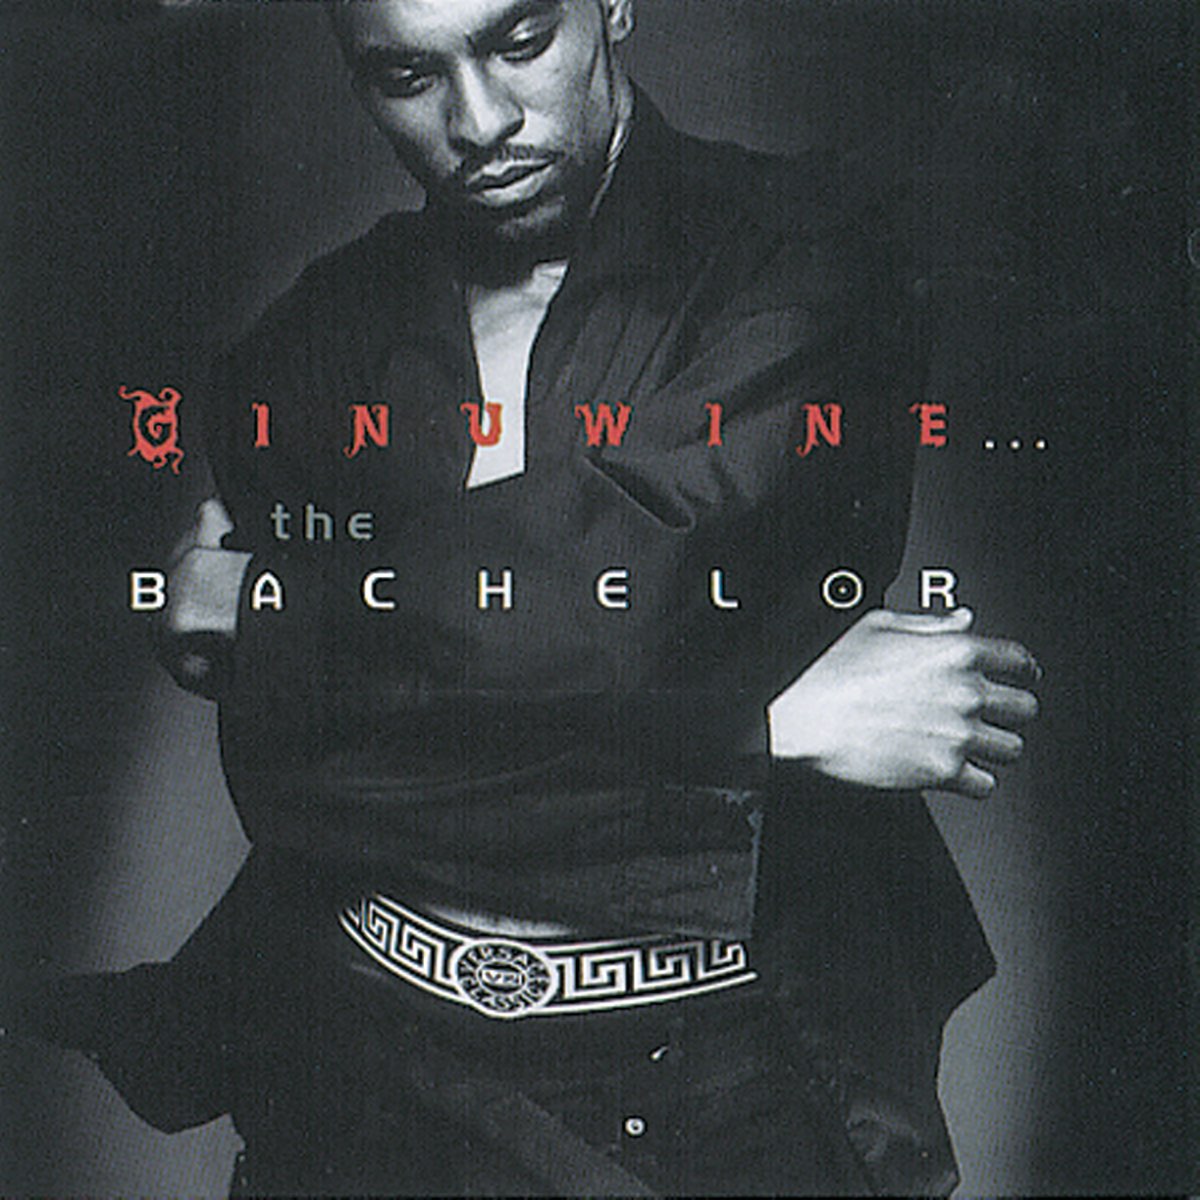 GINUWINE - Ginuwine... the Bachelor (NAD 2023) - 2LP - Red Vinyl [OCT 14]